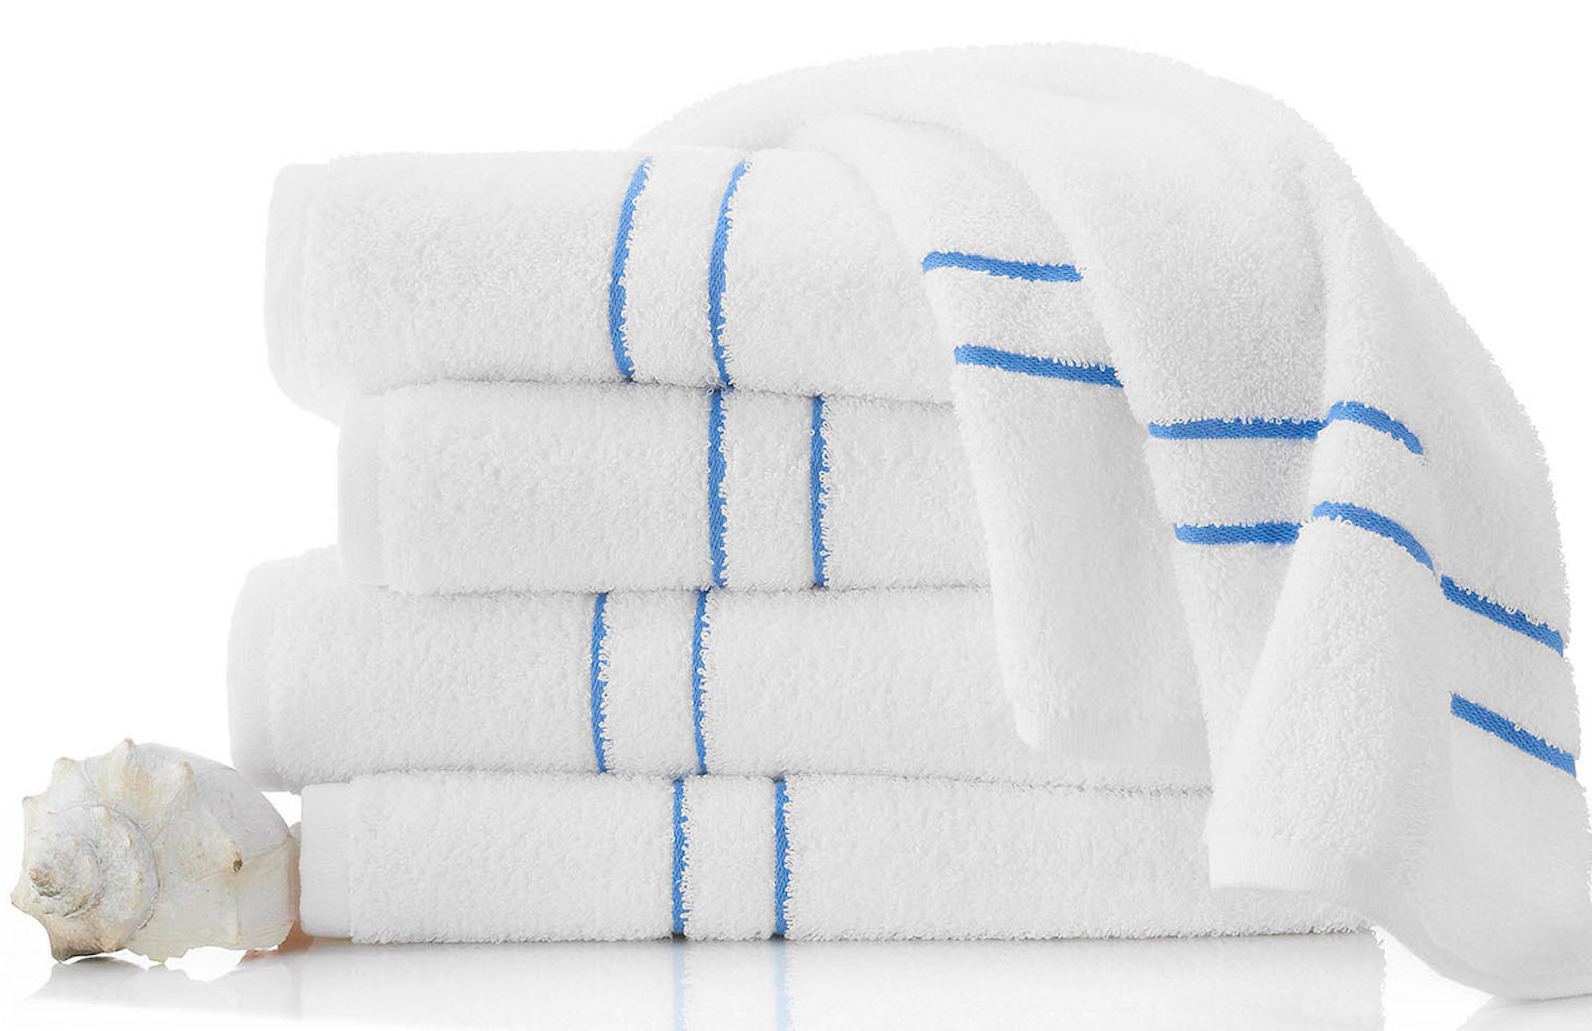 Four neatly folded white towels stacked on one another with a fifth towel draped along the top of the stack.